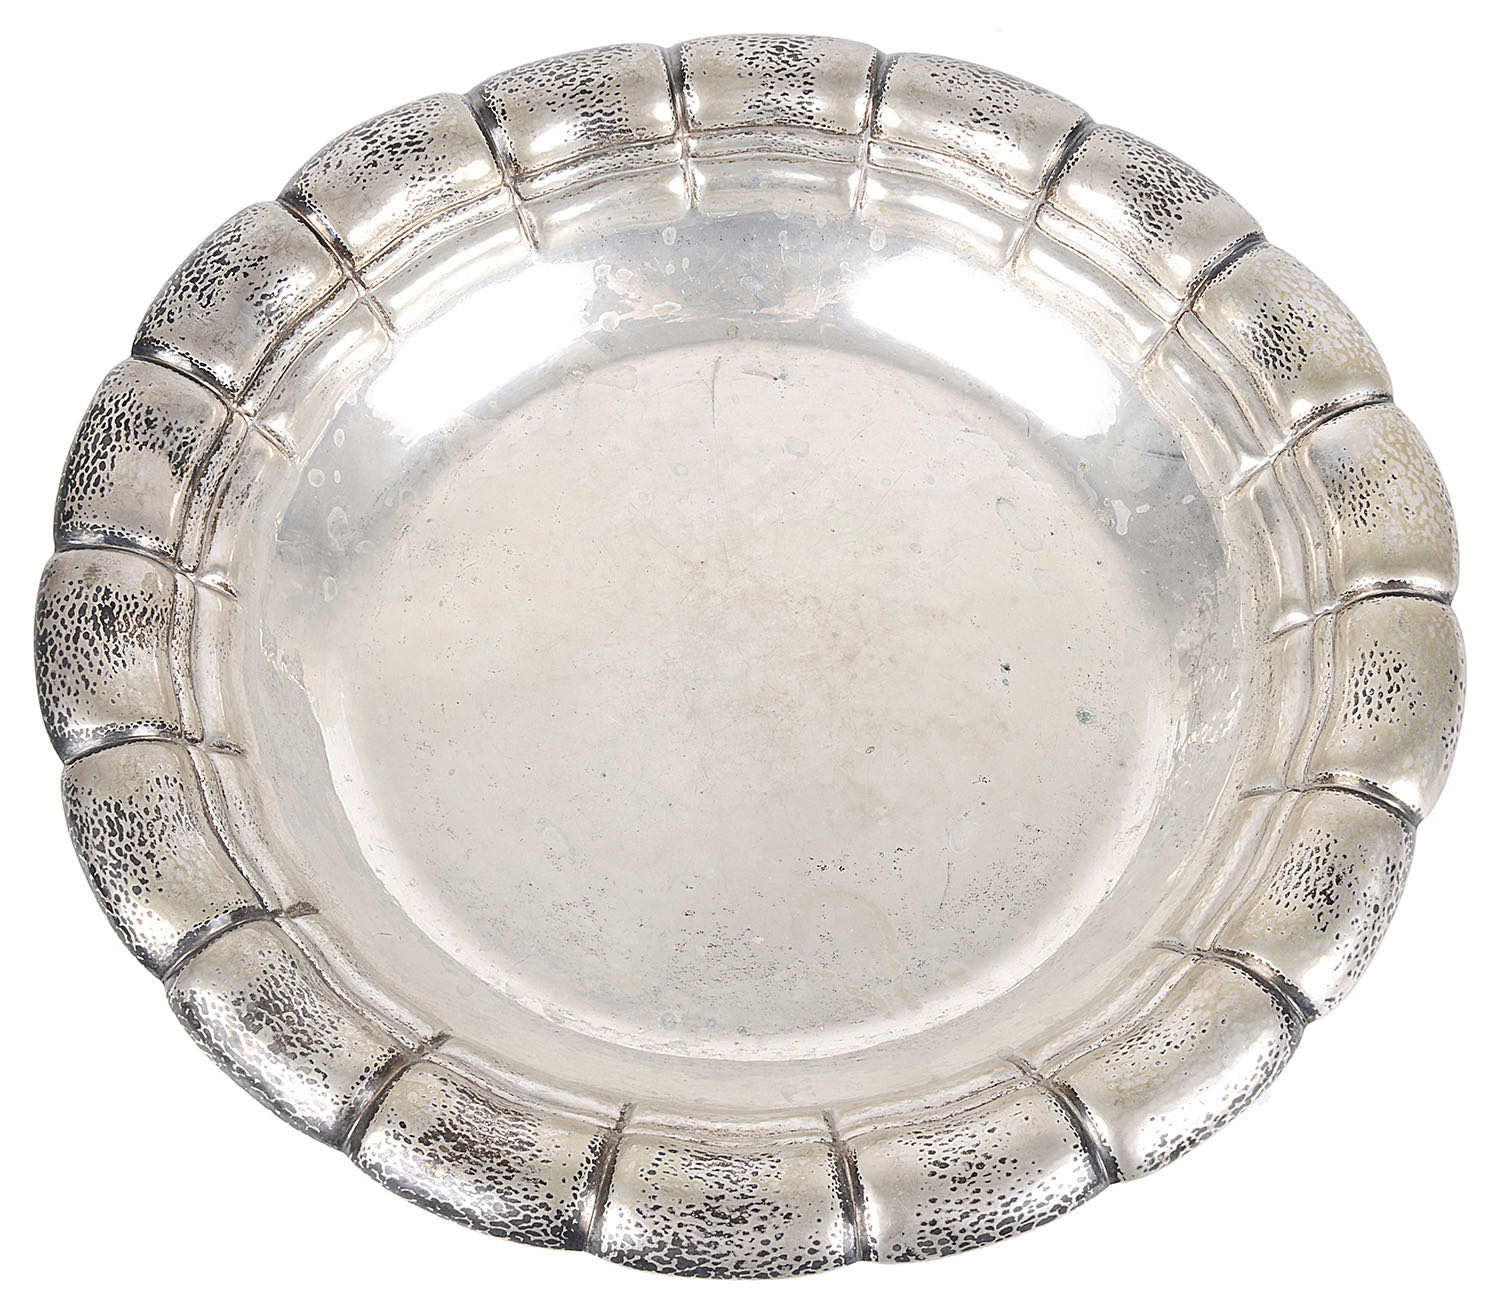 An early 20th century German .830 silver dish